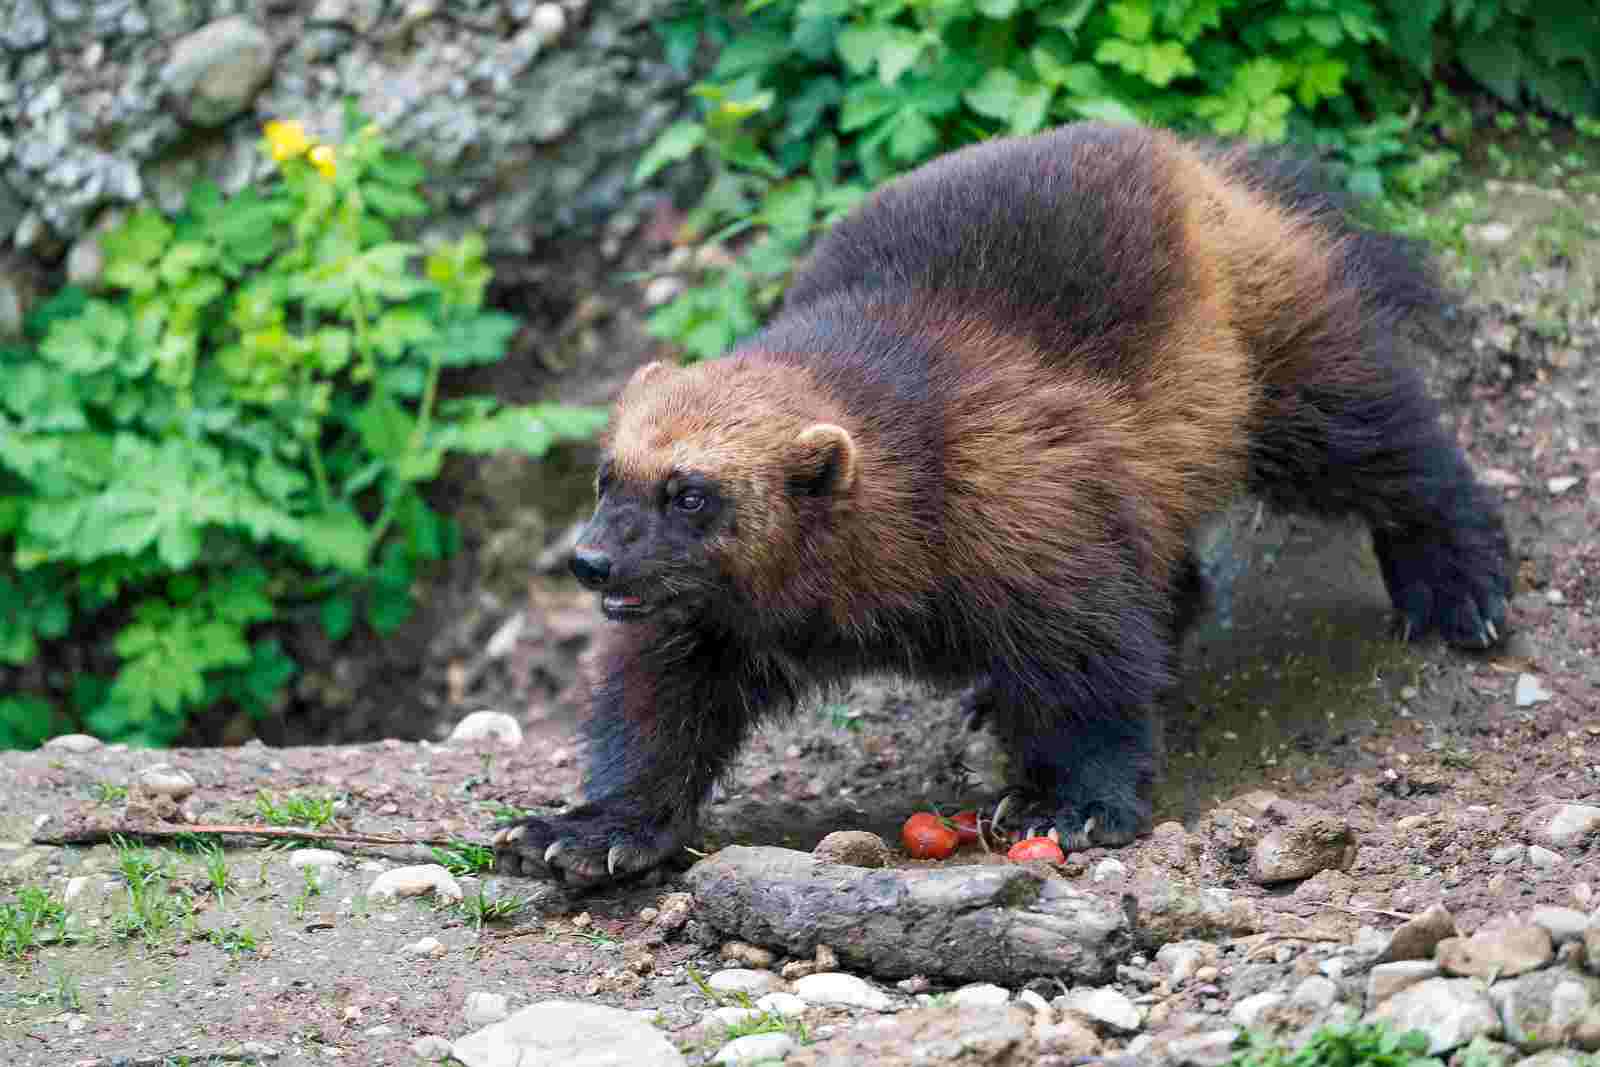 Wolverine Vs Bear: In Terms of Size and Weight, Wolverines Lag Far Behind Bears (Credit: Tambako The Jaguar 2019 .CC BY-ND 2.0.)